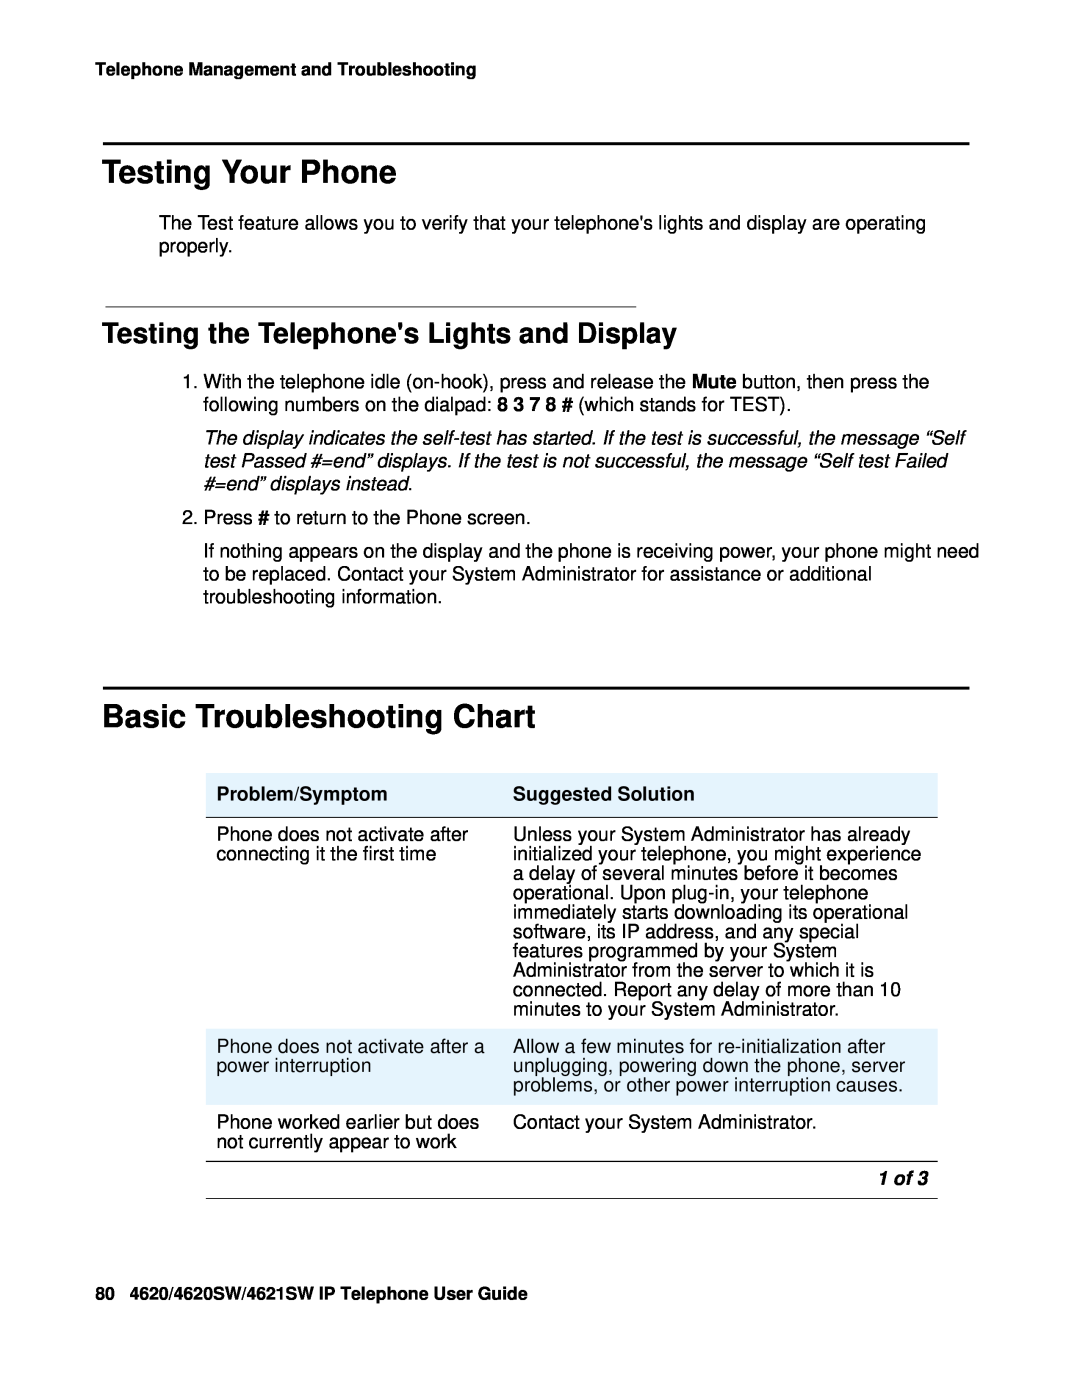 Avaya 4621SW, 4620SW manual Testing Your Phone, Basic Troubleshooting Chart, Testing the Telephones Lights and Display, 1 of 